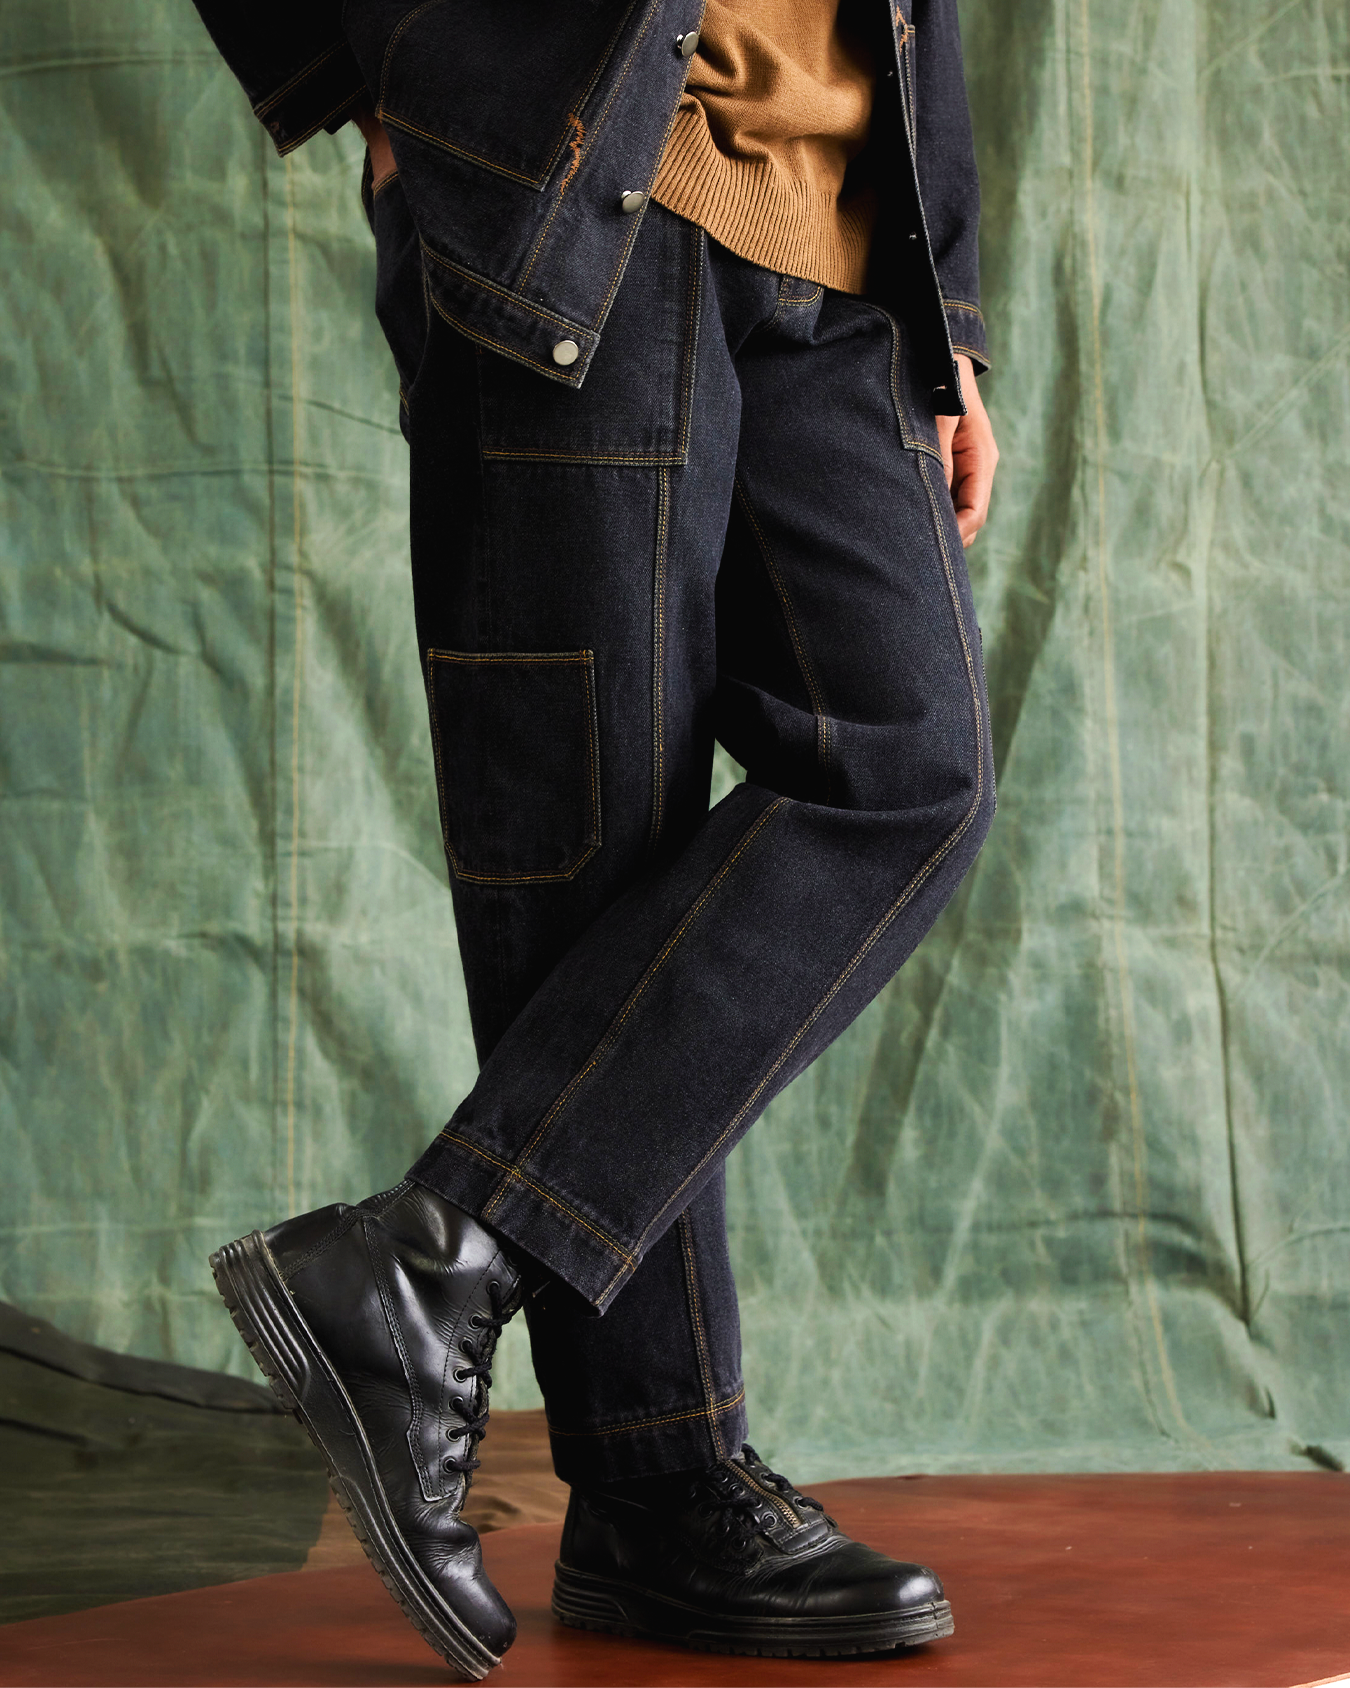 Primary image of Multi Thread Cargo Denim Trousers, a product by Country Made